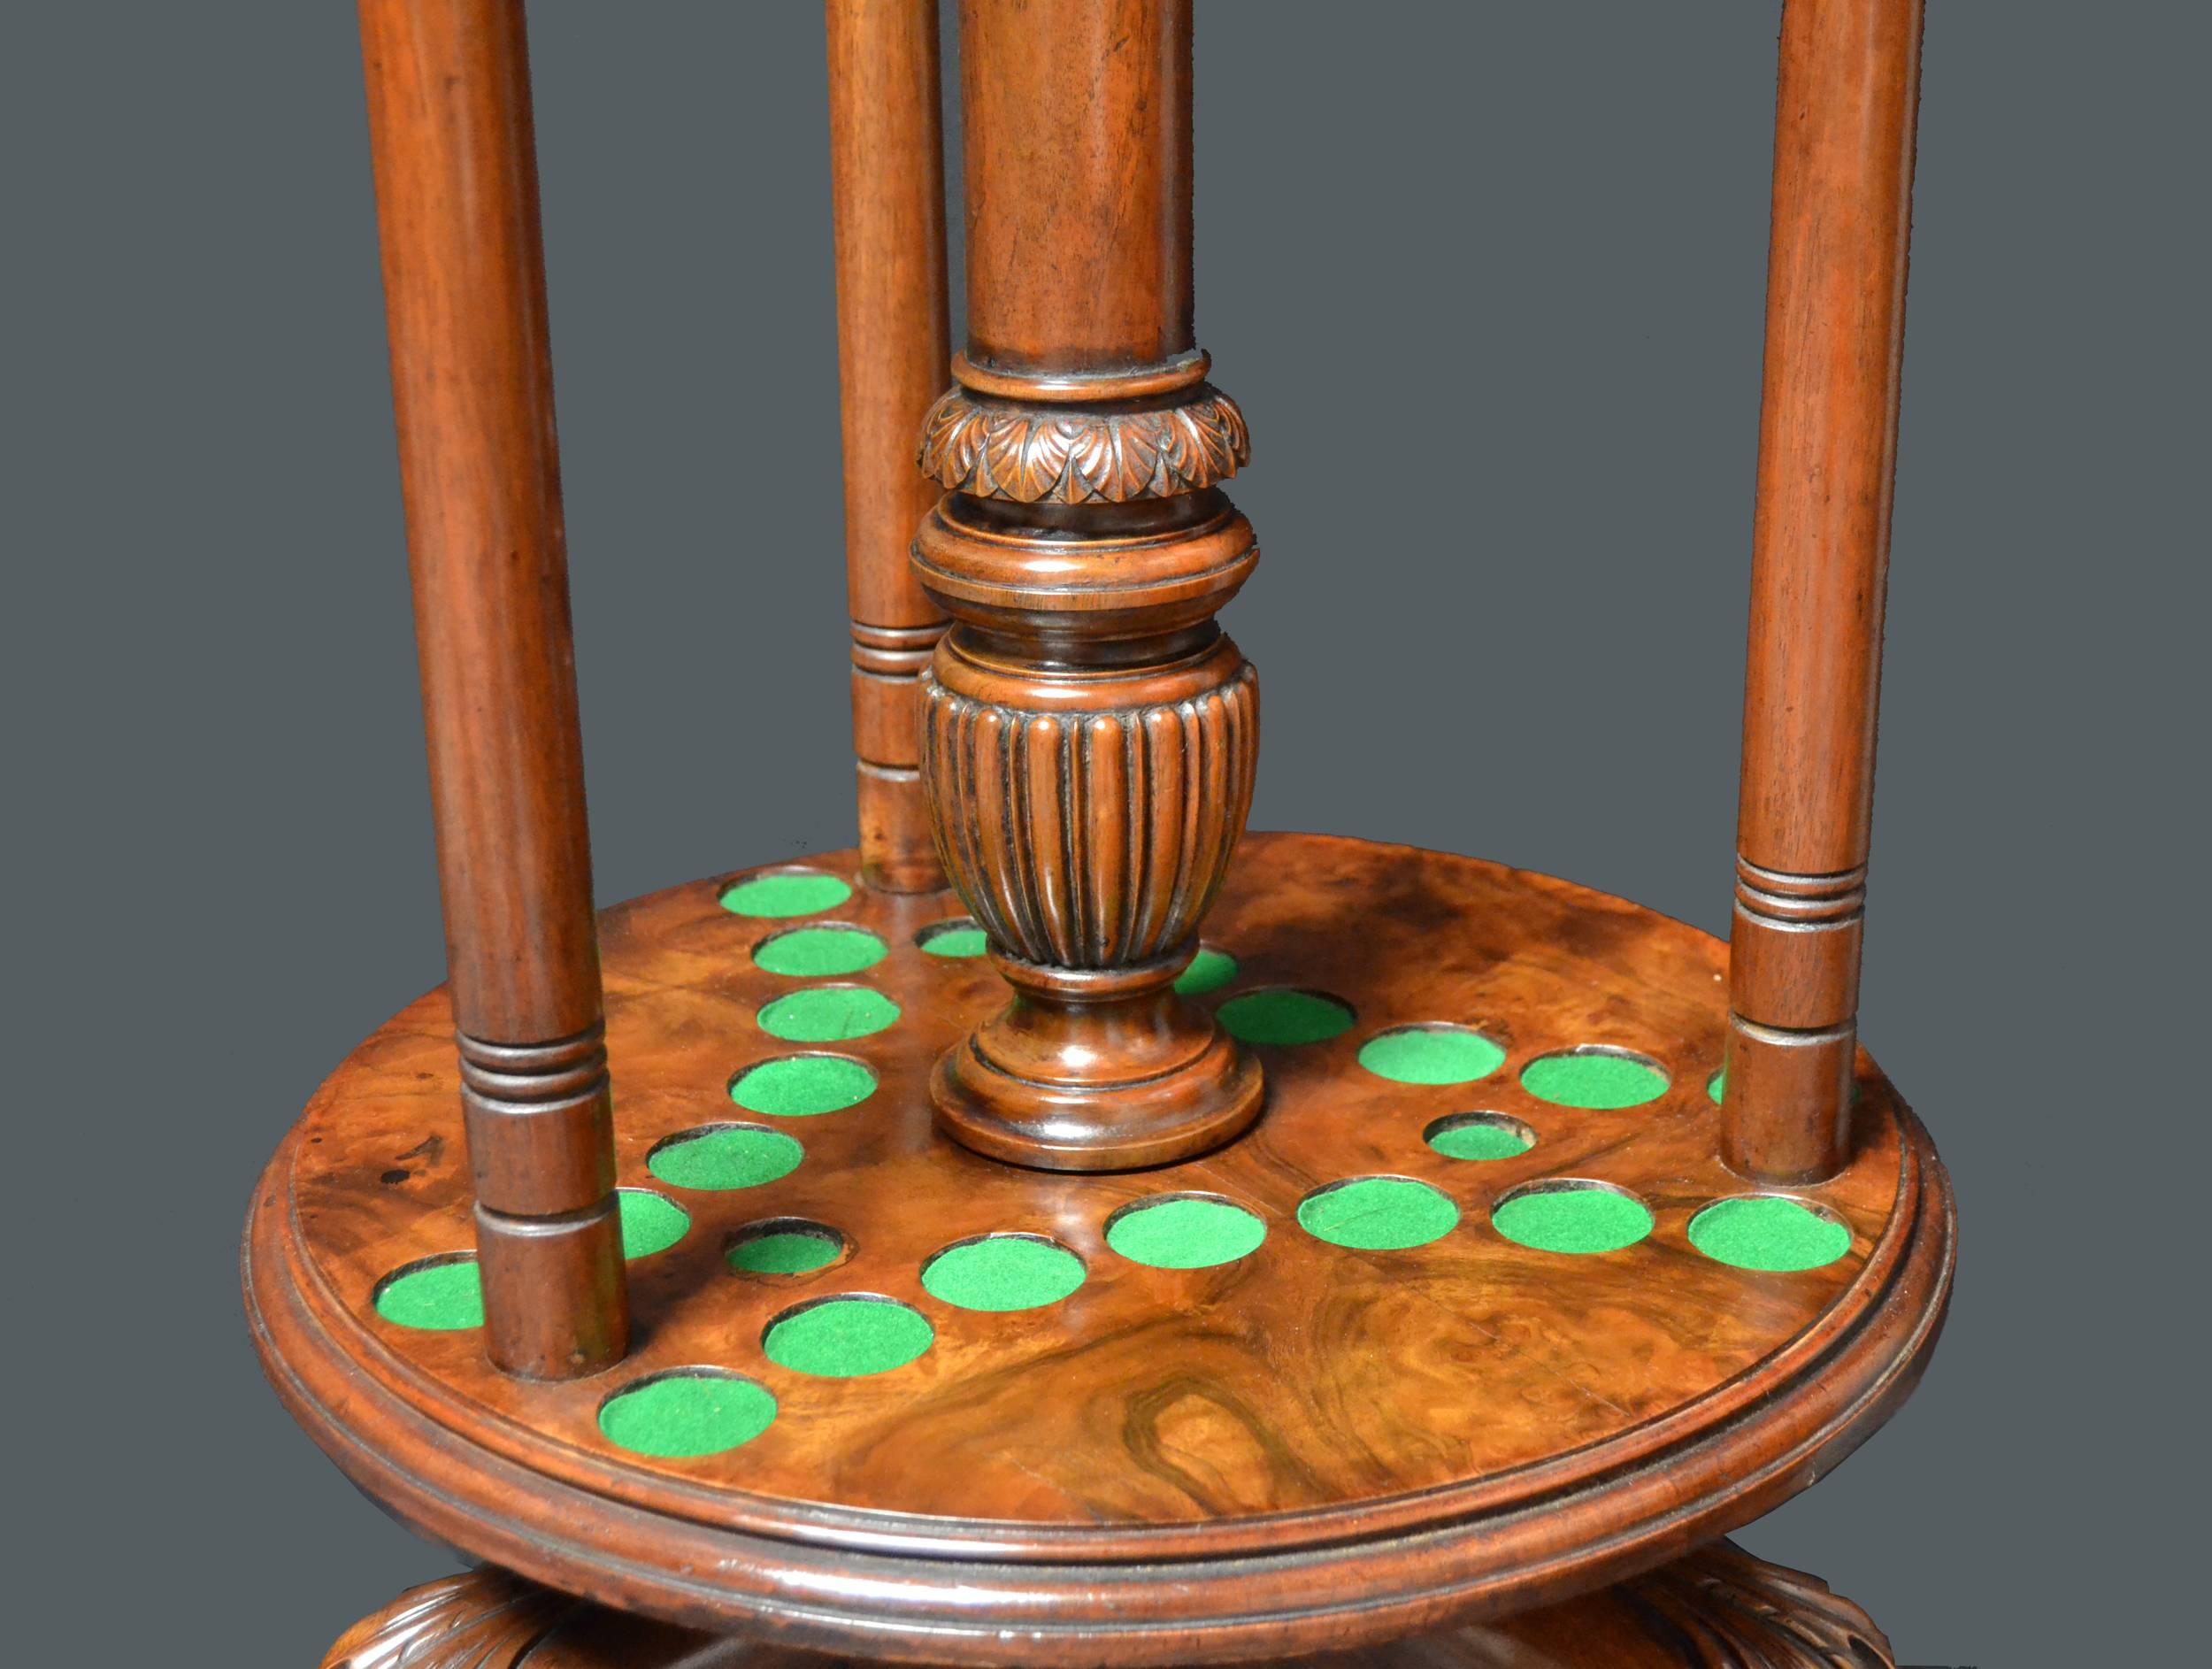 An imposing solid walnut Billiard cue stand of fabulous stature and quality, of carousel design standing on three massive carved paw feet, the revolving turntable base is supported by a central decorative column which is mounted with a gadrooned